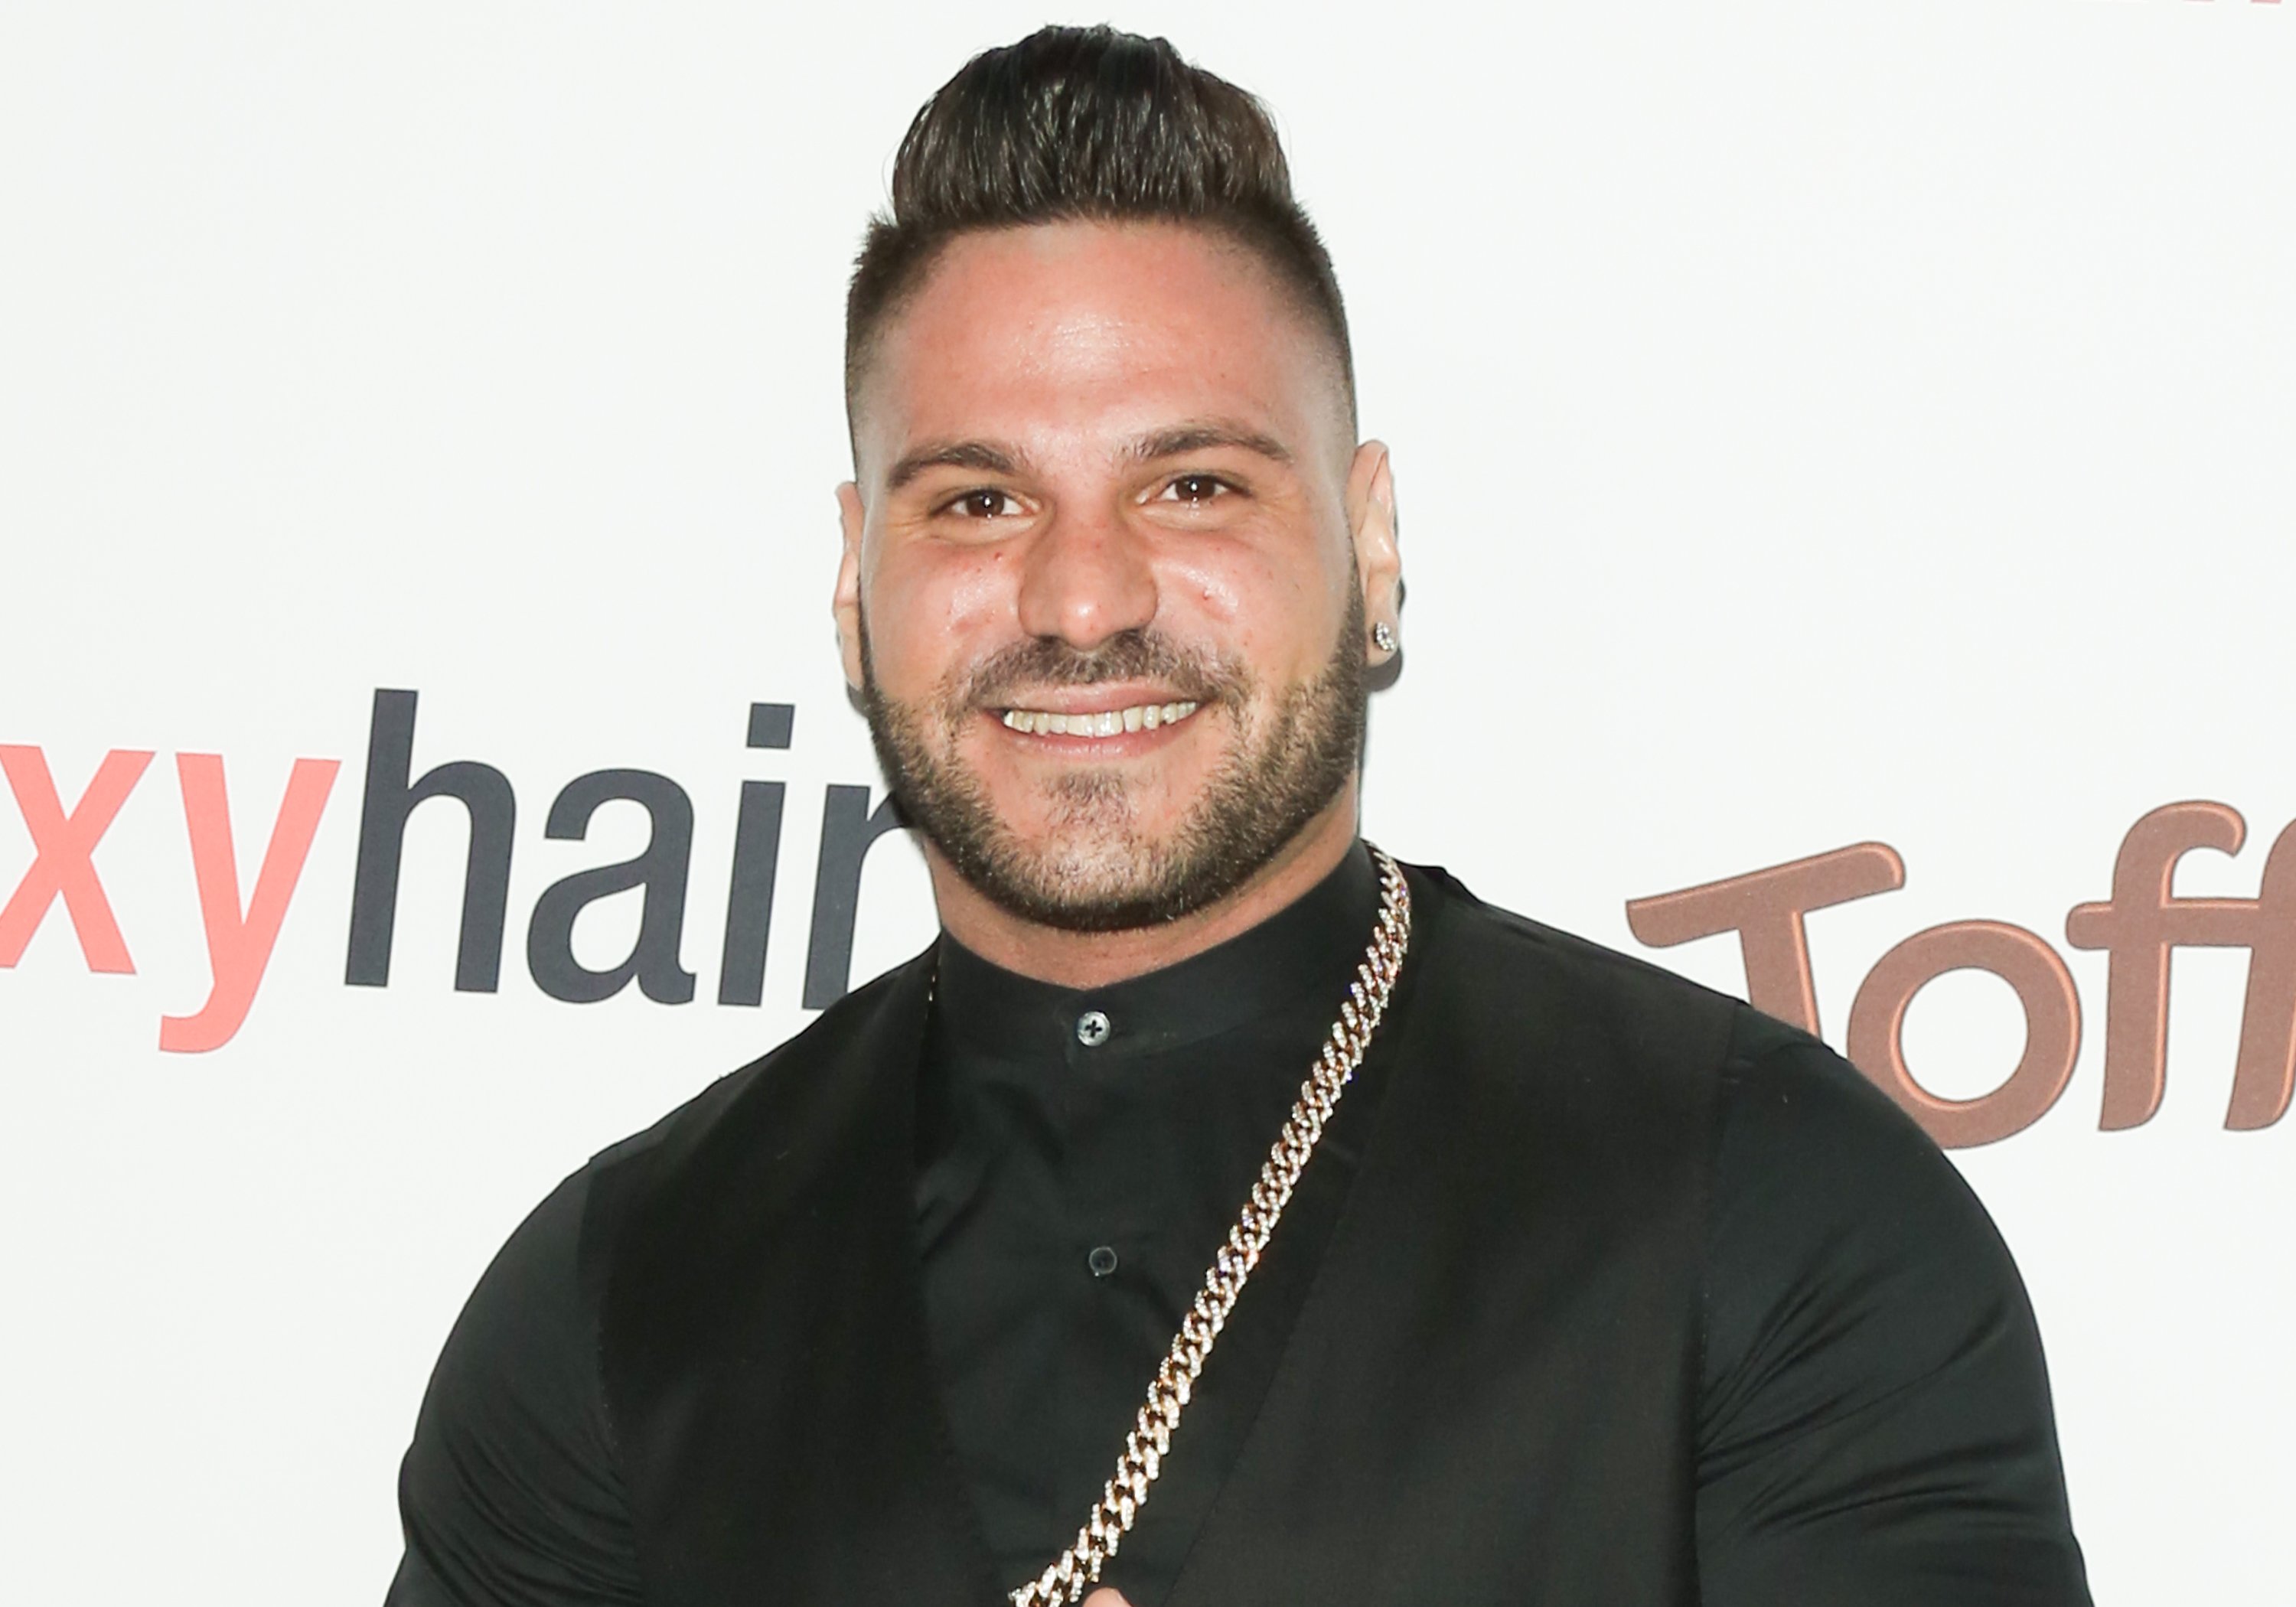 Ronnie Ortiz-Magro from 'Jersey Shore' smiles for the camera